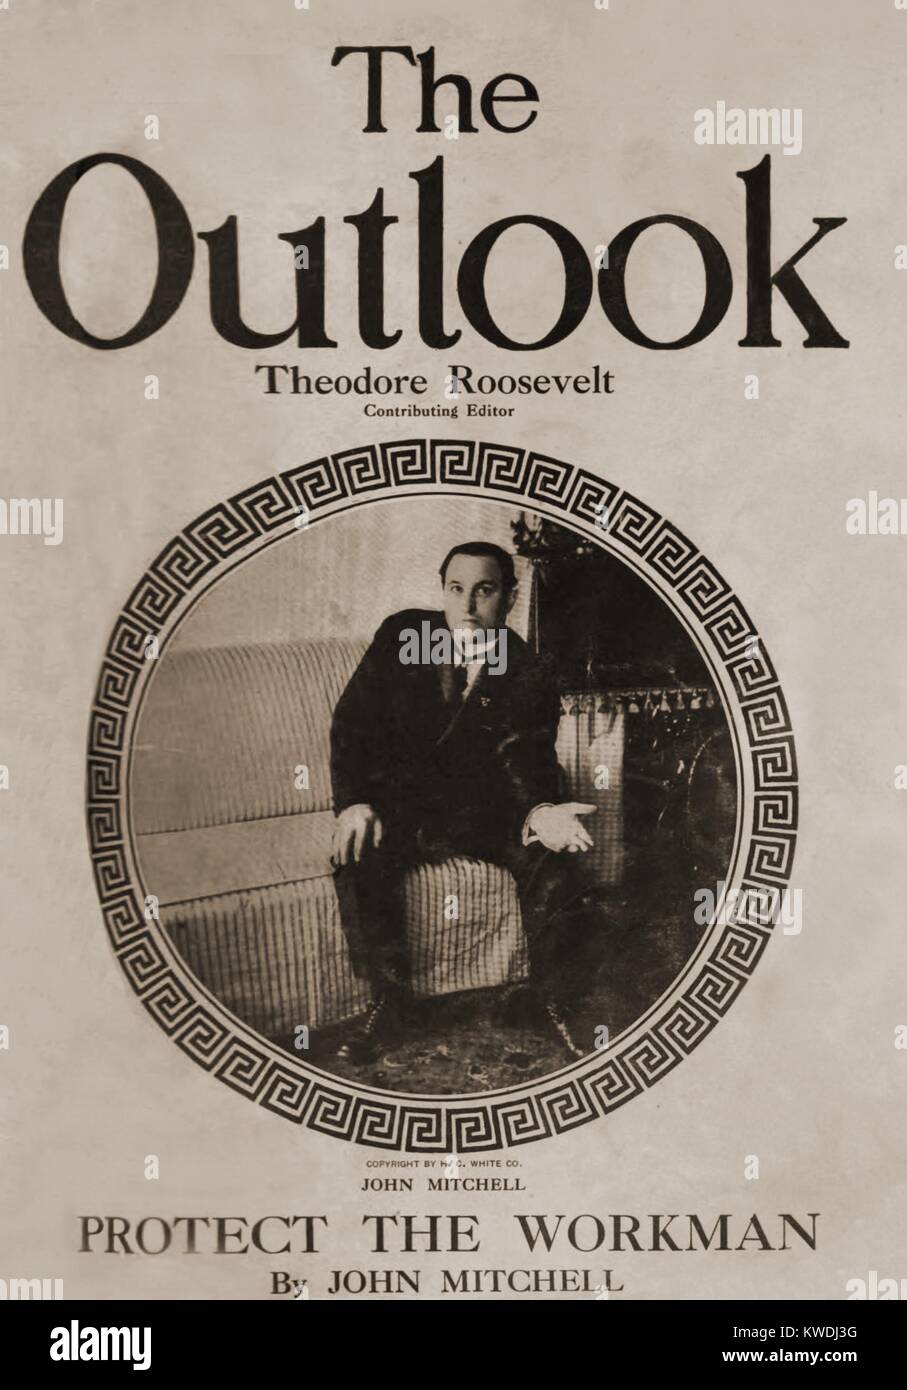 THE OUTLOOK, November 13, 1909, notes Theodore Roosevelt, Associate Editor on the Masthead. The illustration shows United Mine Workers leader, John Mitchell, author of the Protect the Workman (BSLOC 2017 8 95) Stock Photo